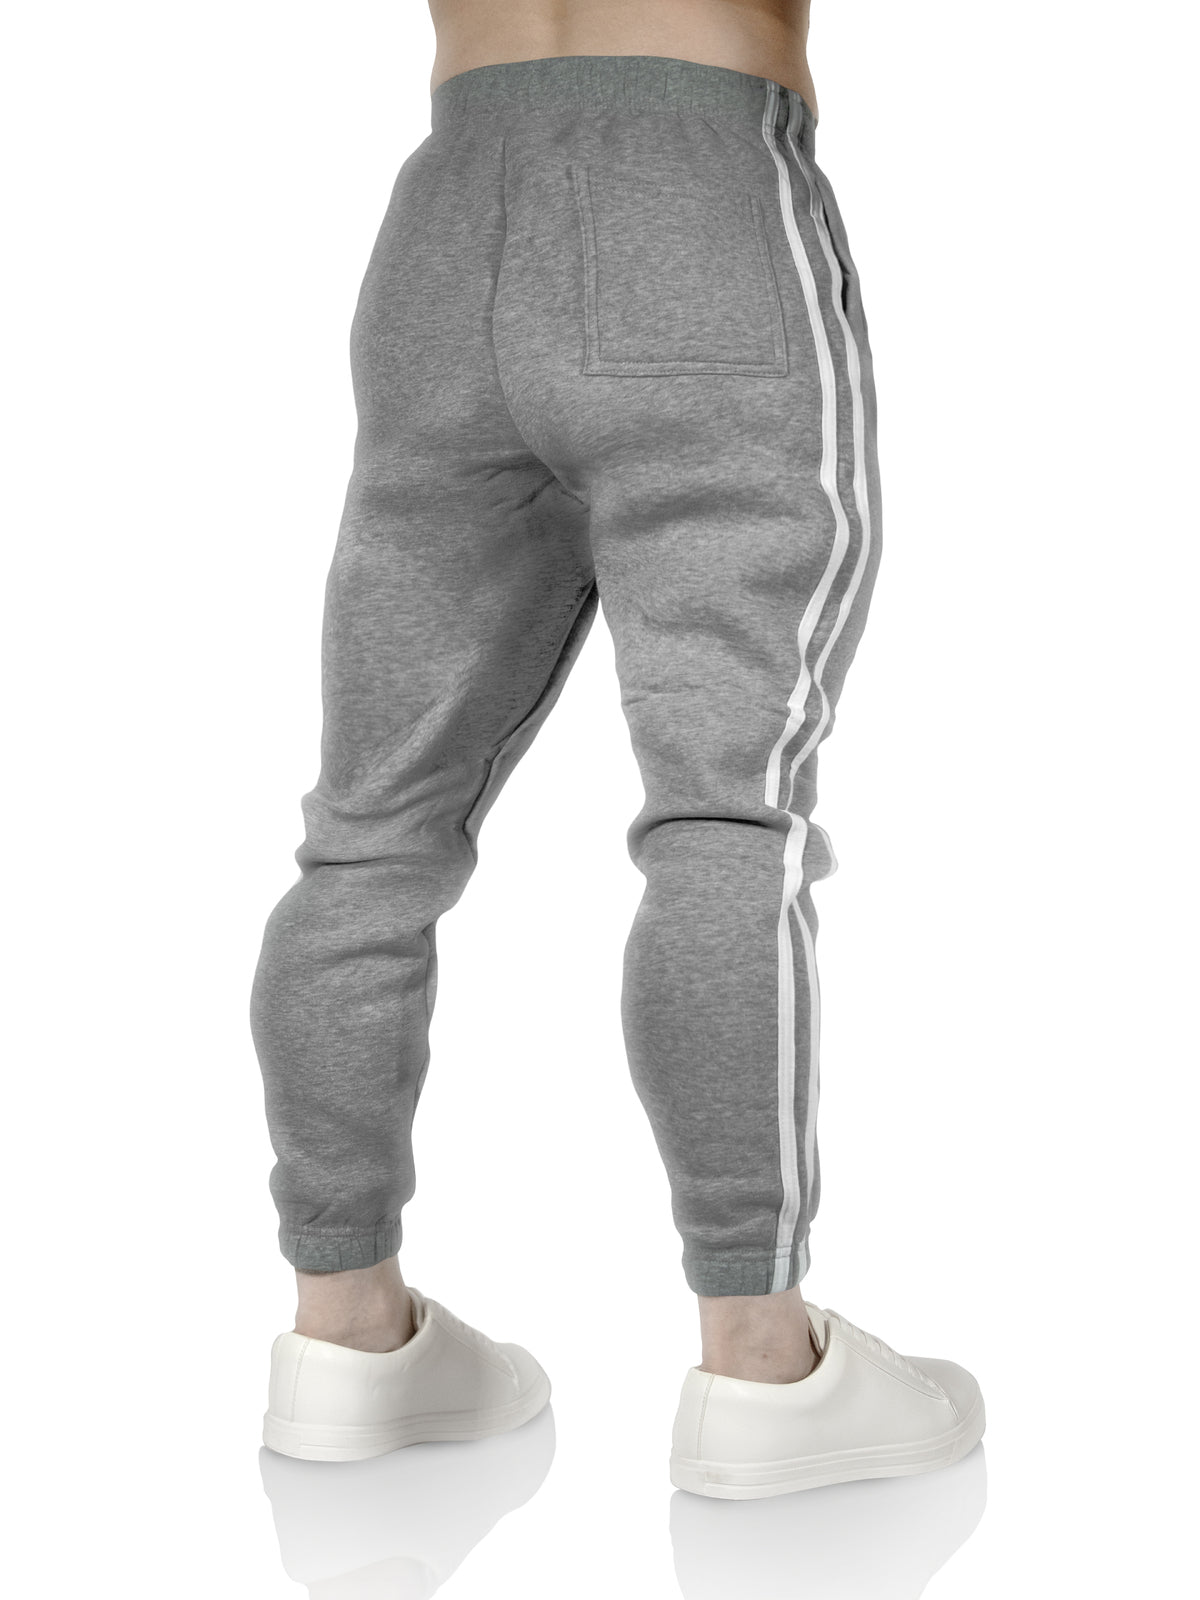 Mens Fleece Skinny Track Pants Jogger Gym Casual Sweat Trackies Warm Trousers - Grey Marle/White Stripe - XL